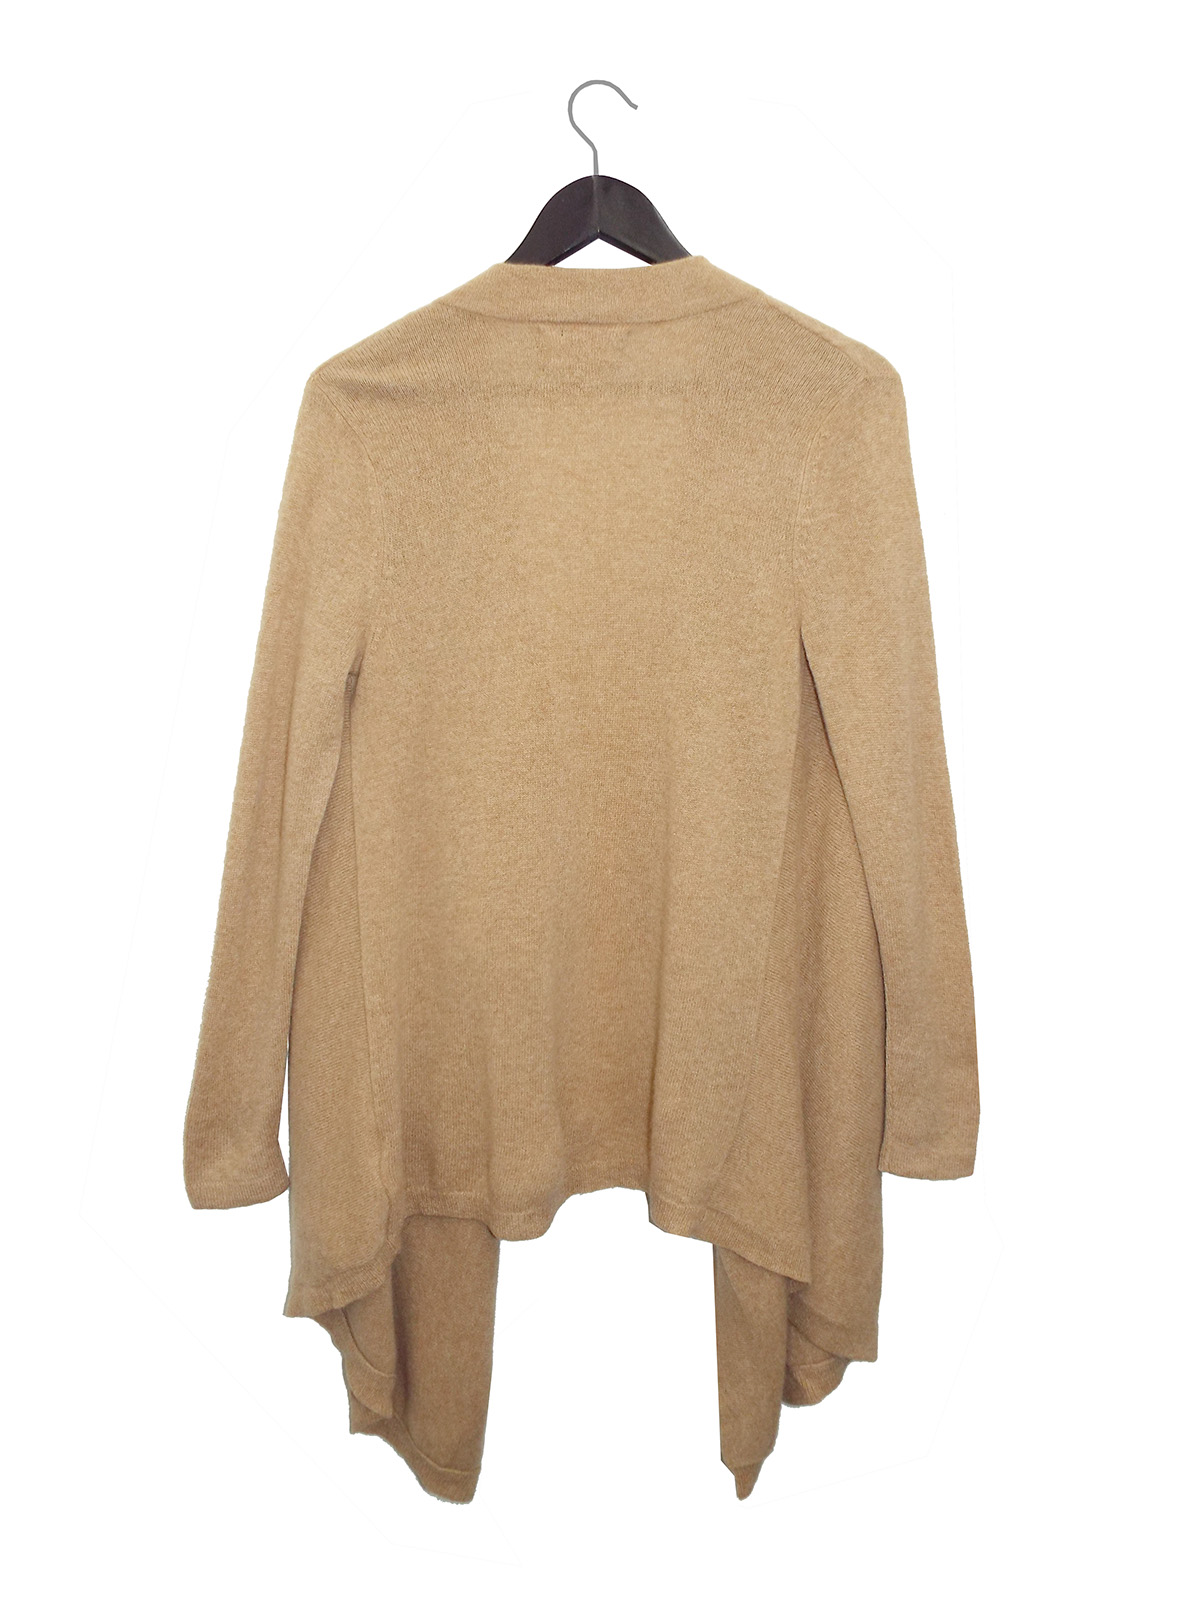 Limited Editions - - Limited Editions CAMEL Pure Cashmere Open Front ...